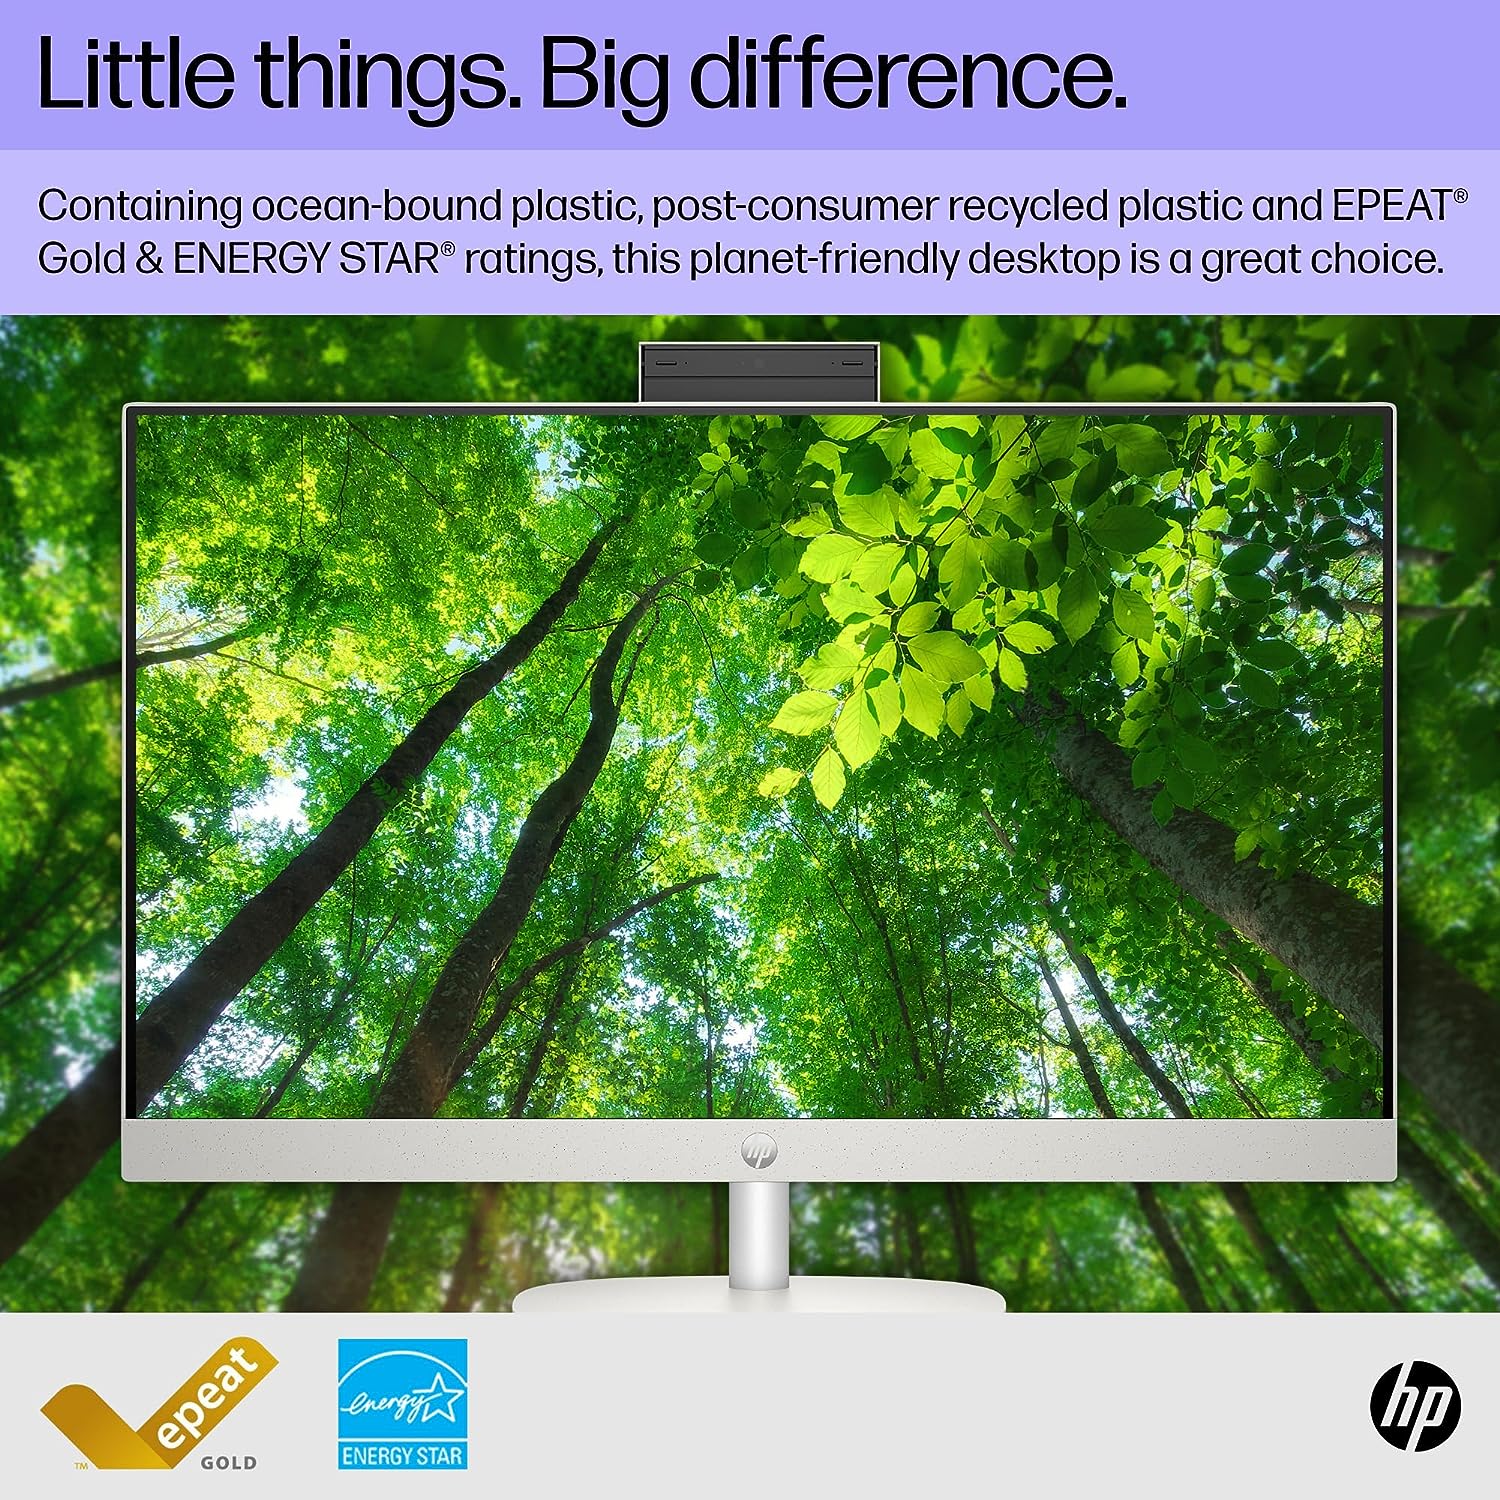 HP 27 inch All-in-One Desktop PC Review